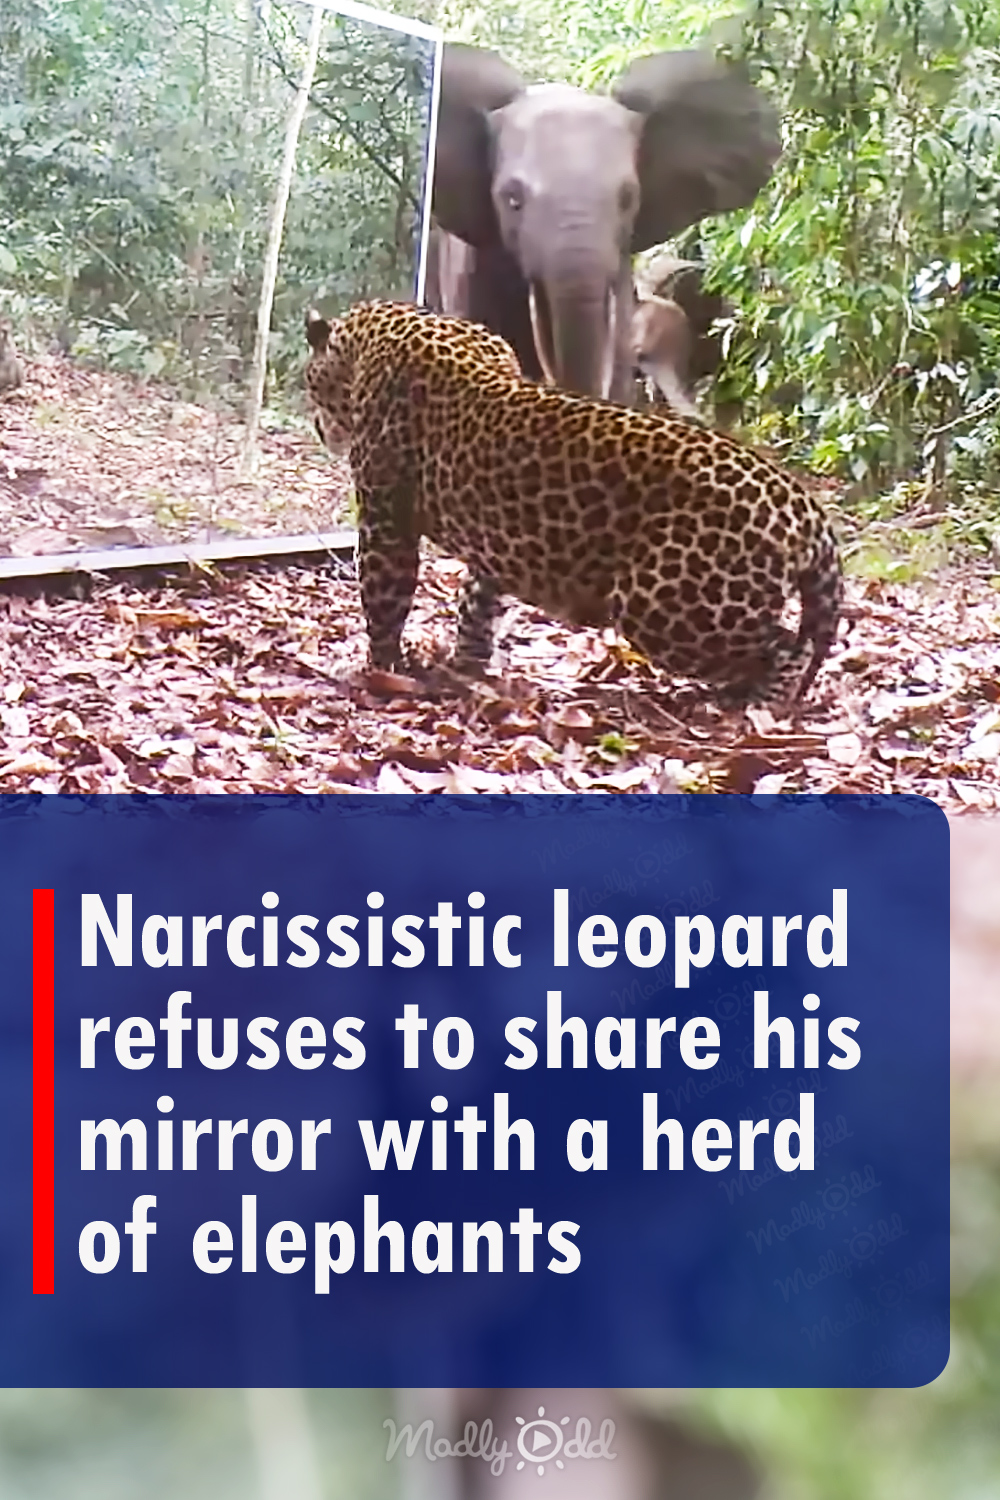 Narcissistic leopard refuses to share his mirror with a herd of elephants